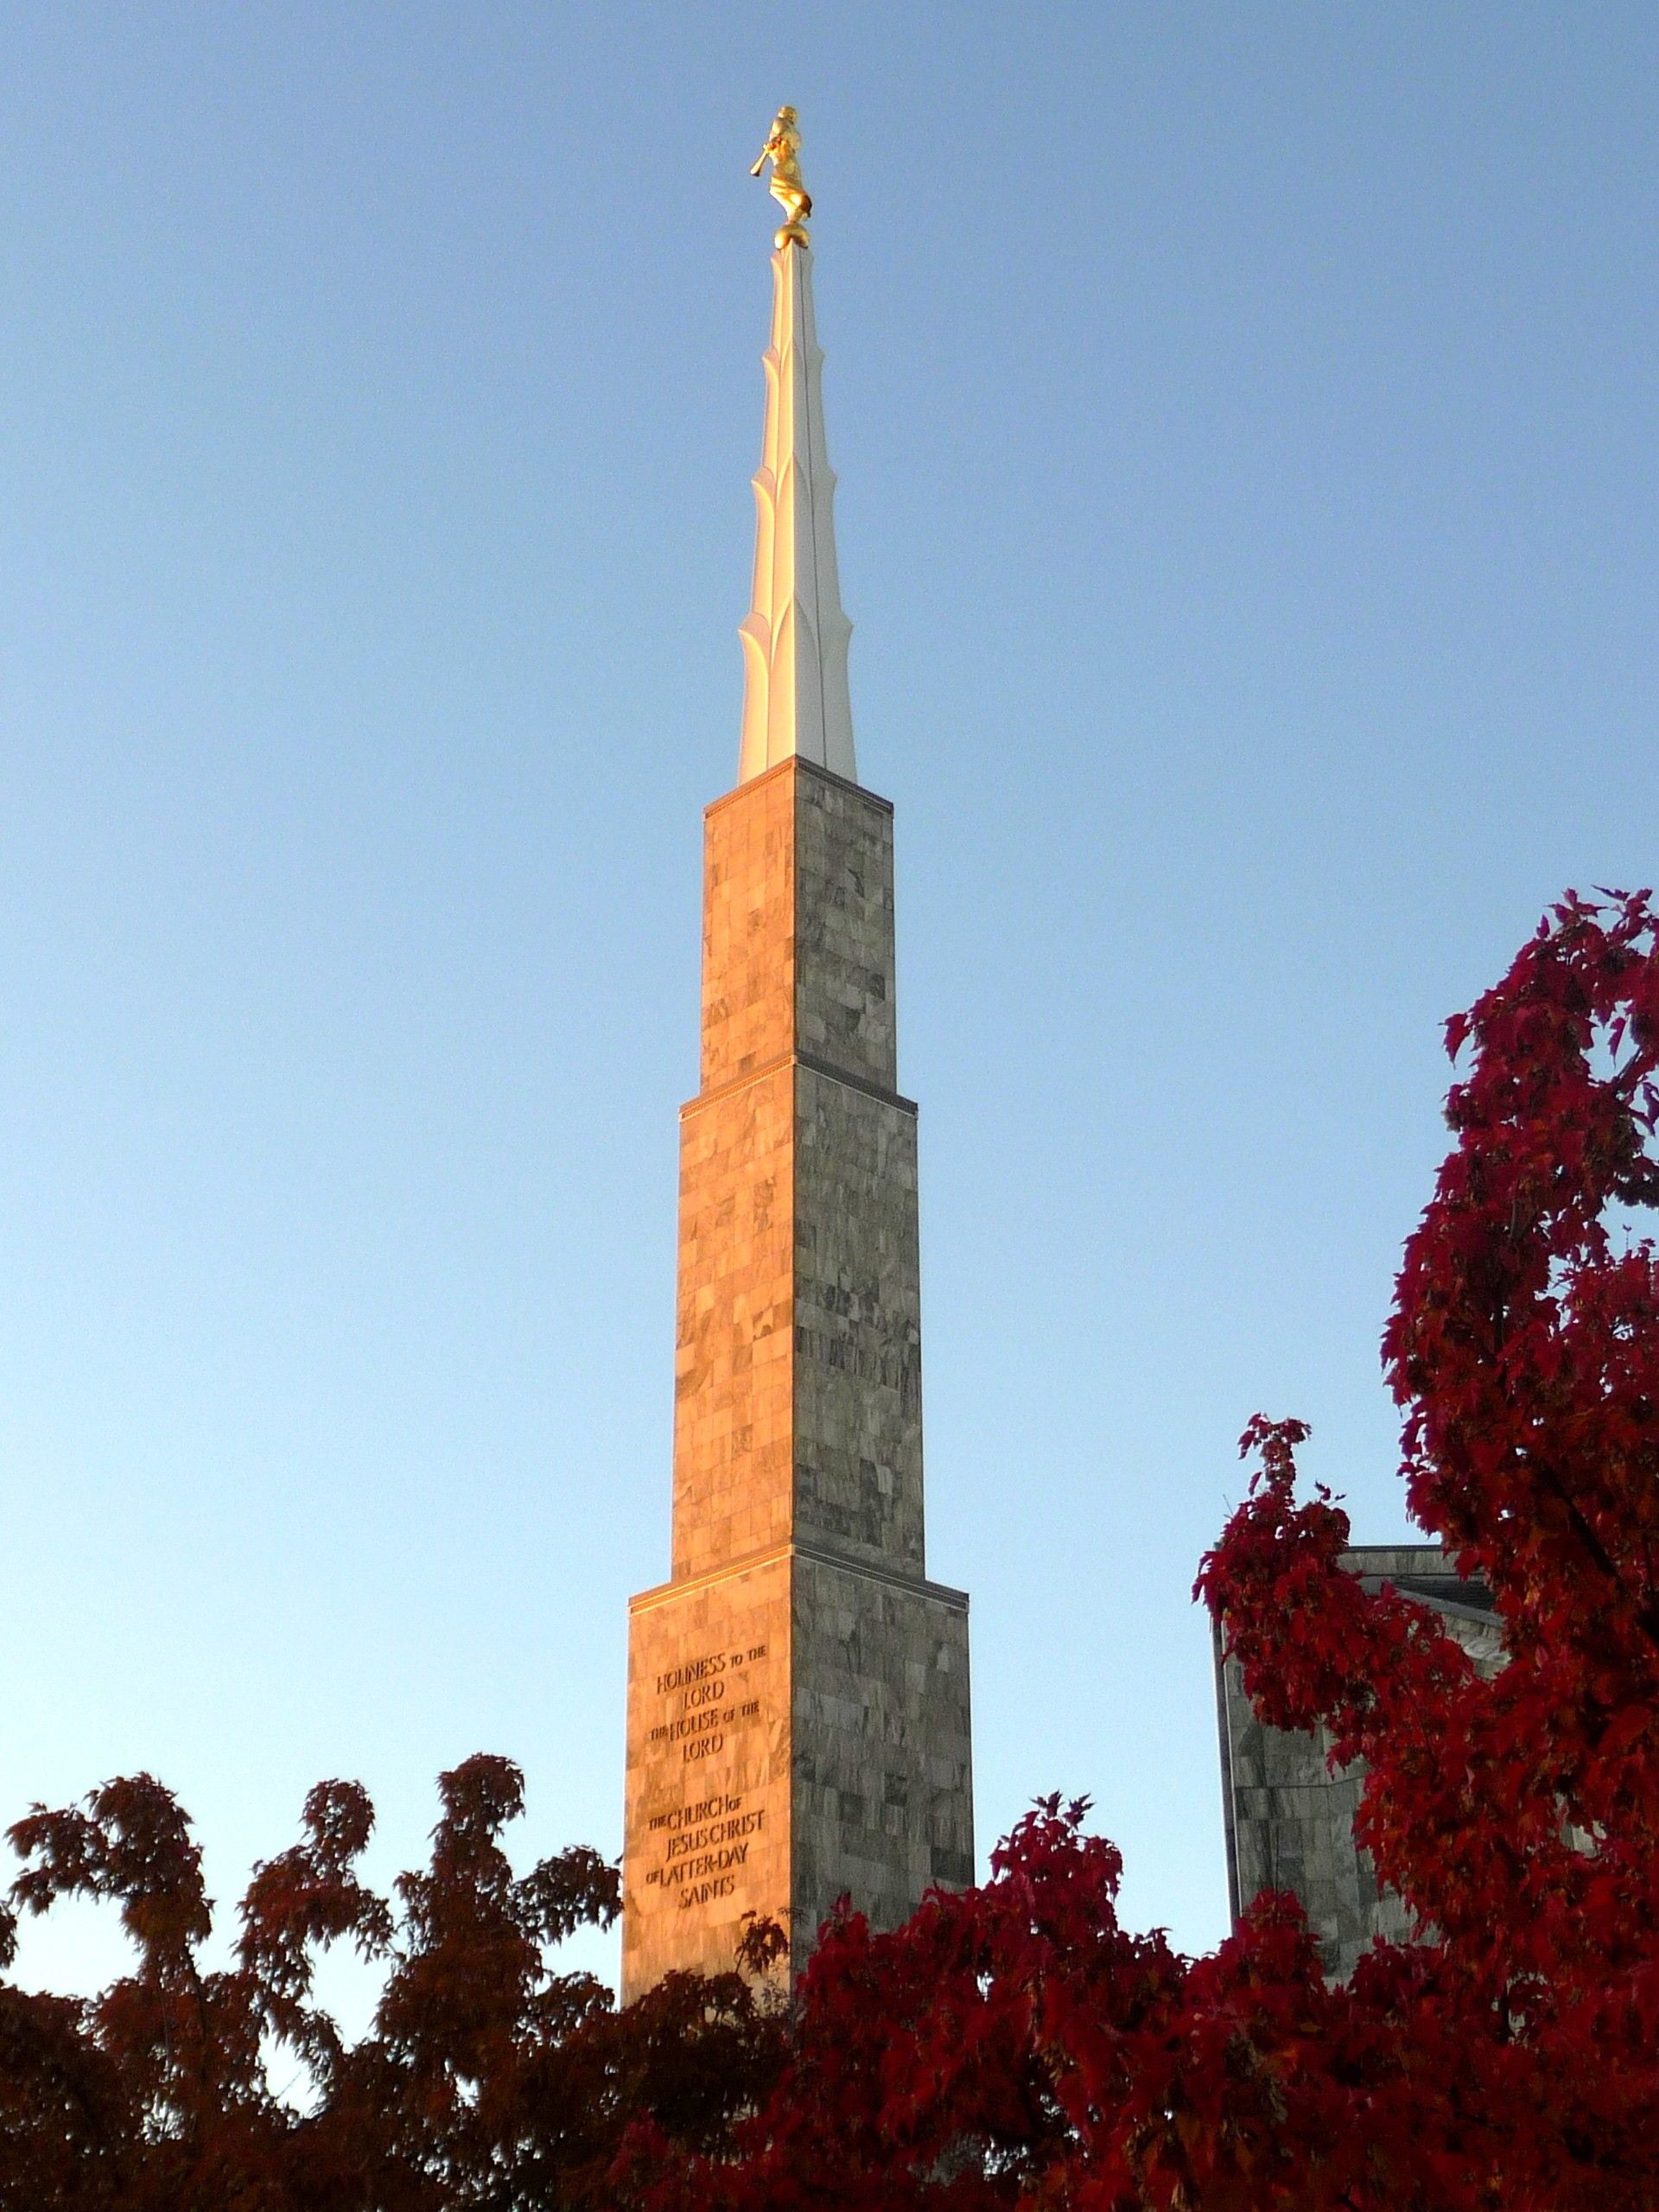 The angel Moroni stands on the tallest spire of the Boise Idaho Temple.